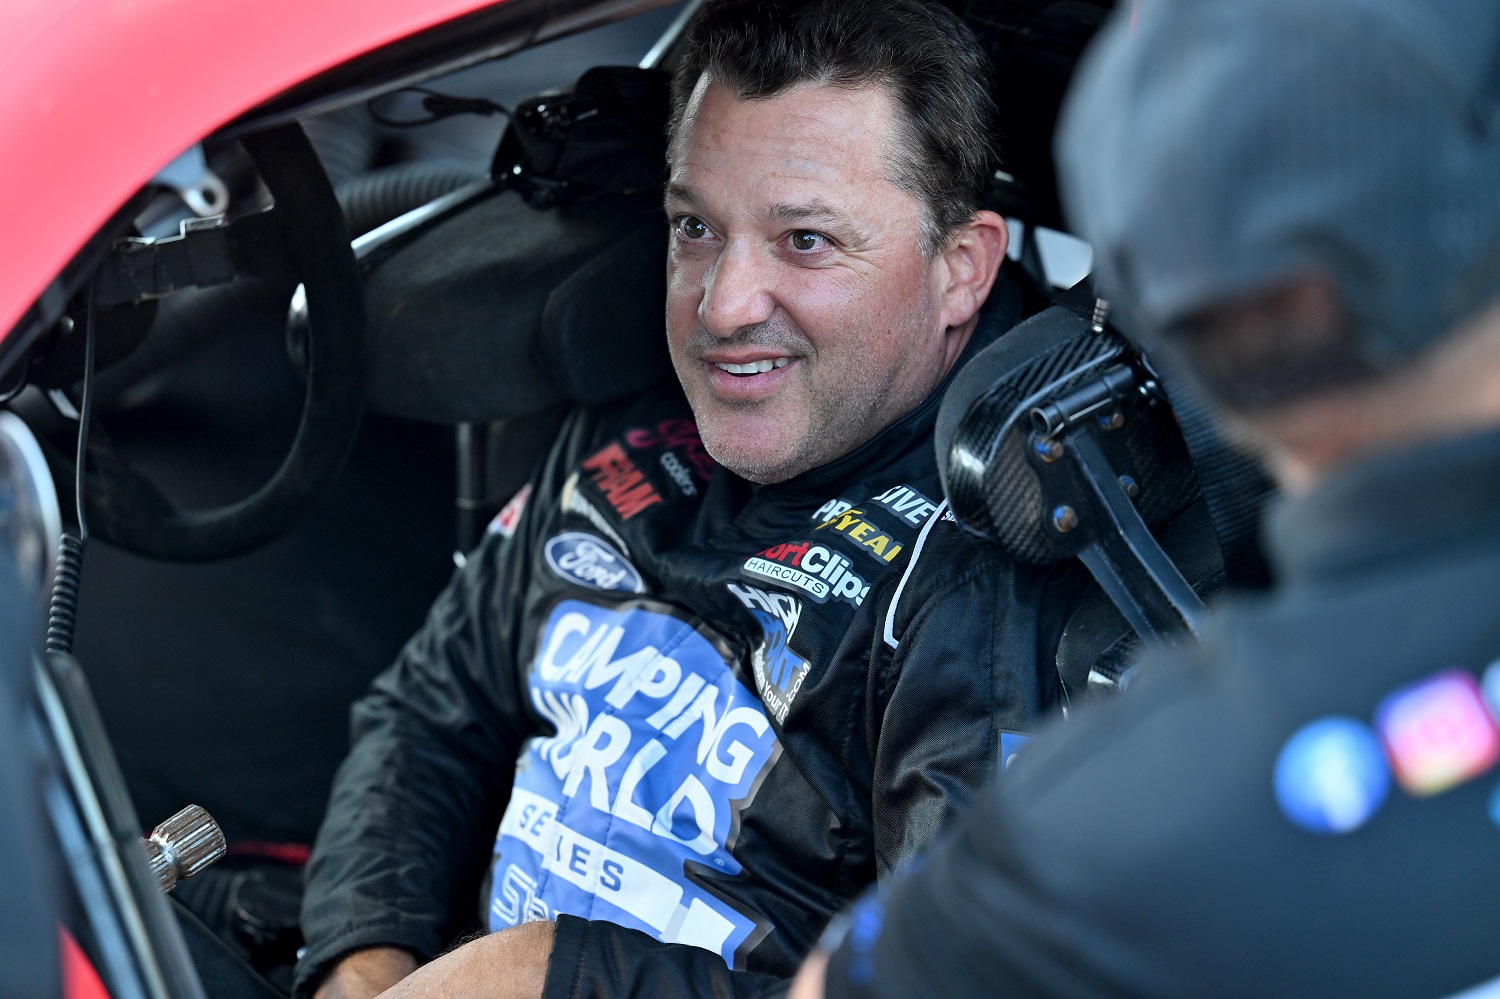 Tony Stewart talks with his crew prior to the start of the SRX qualifying race at Sharon Speedway on July 23, 2022.